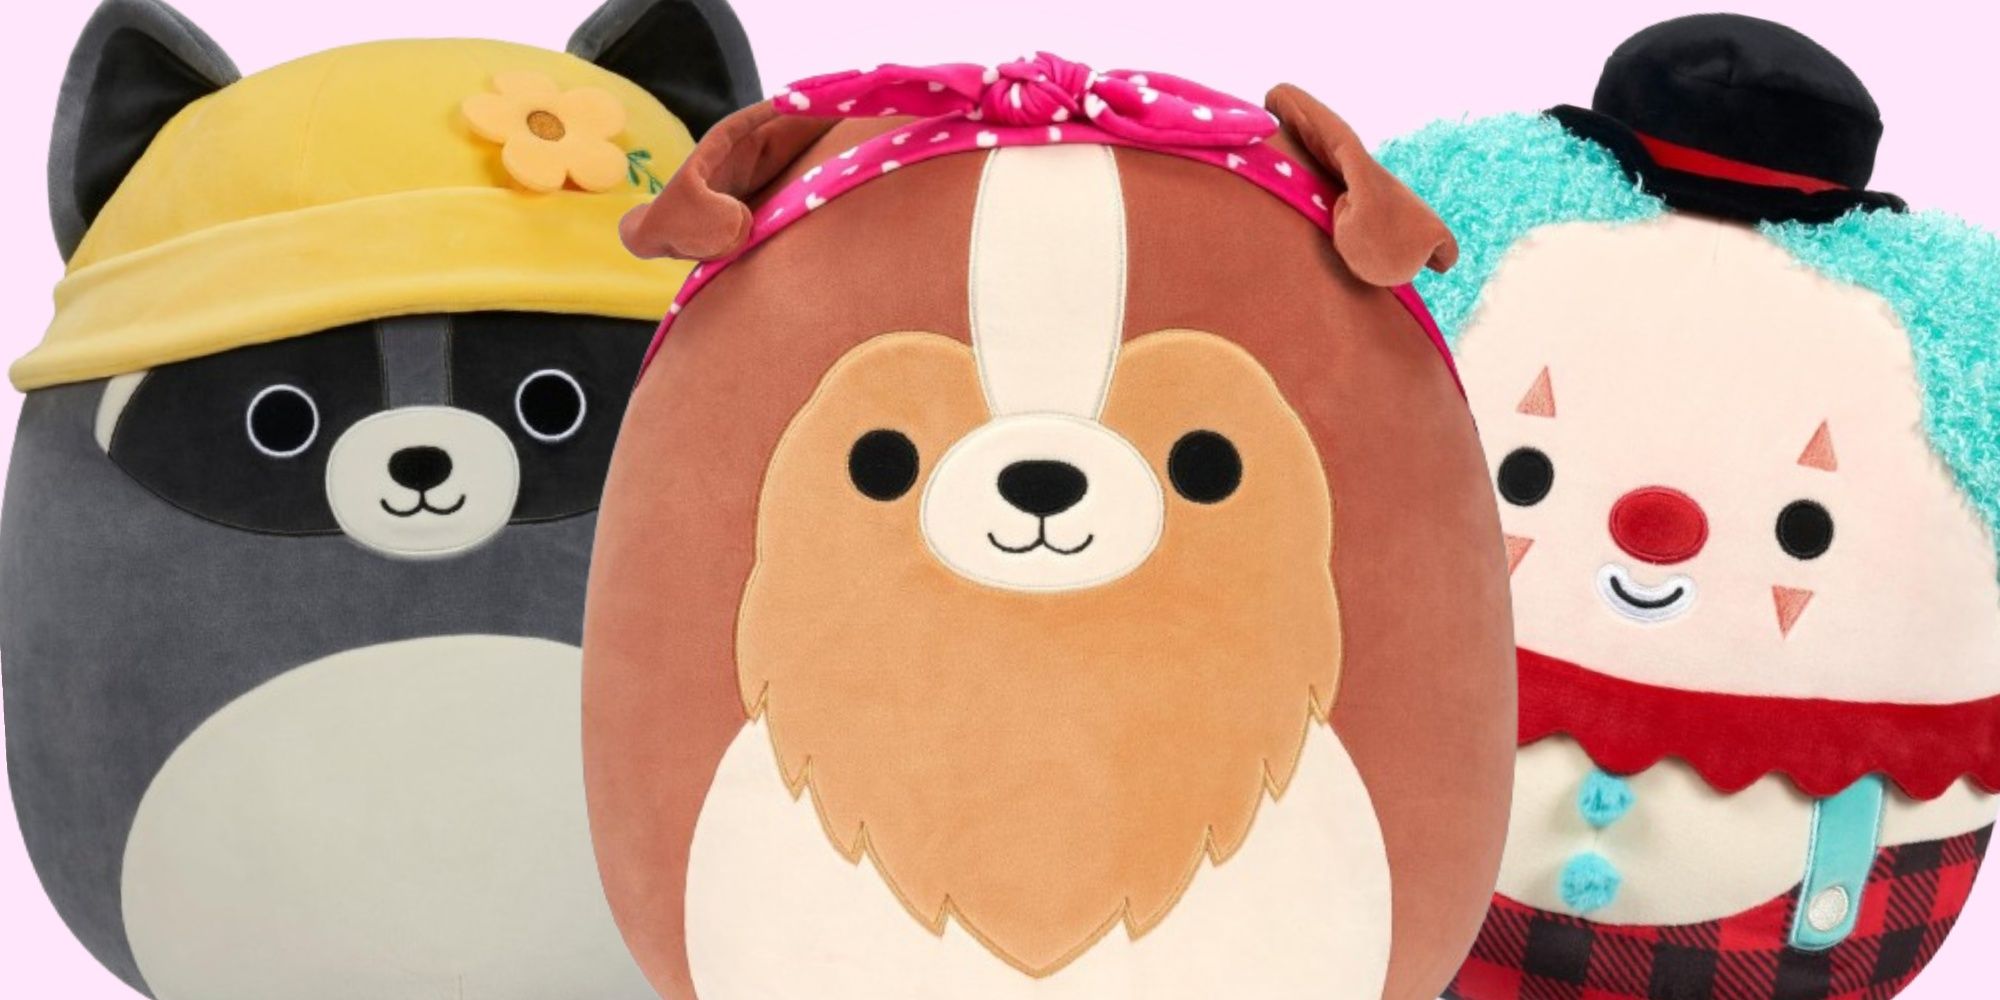 Raccoon, dog and clown Squishmallows on a pink background